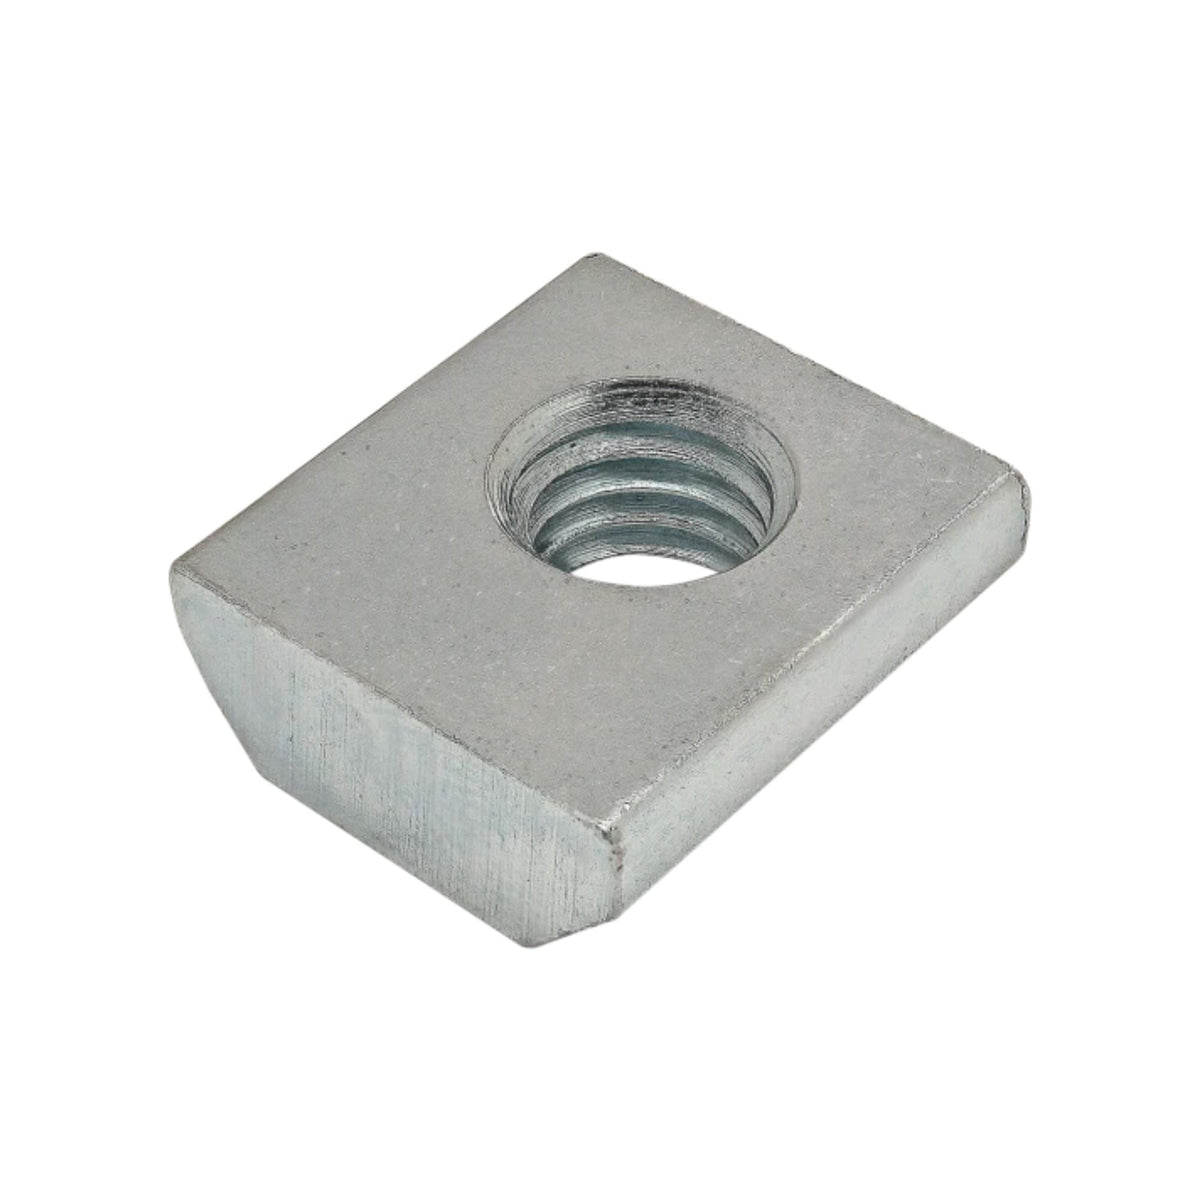 square, metal t-nut with a narrowed bottom, and a threaded hole on the top right